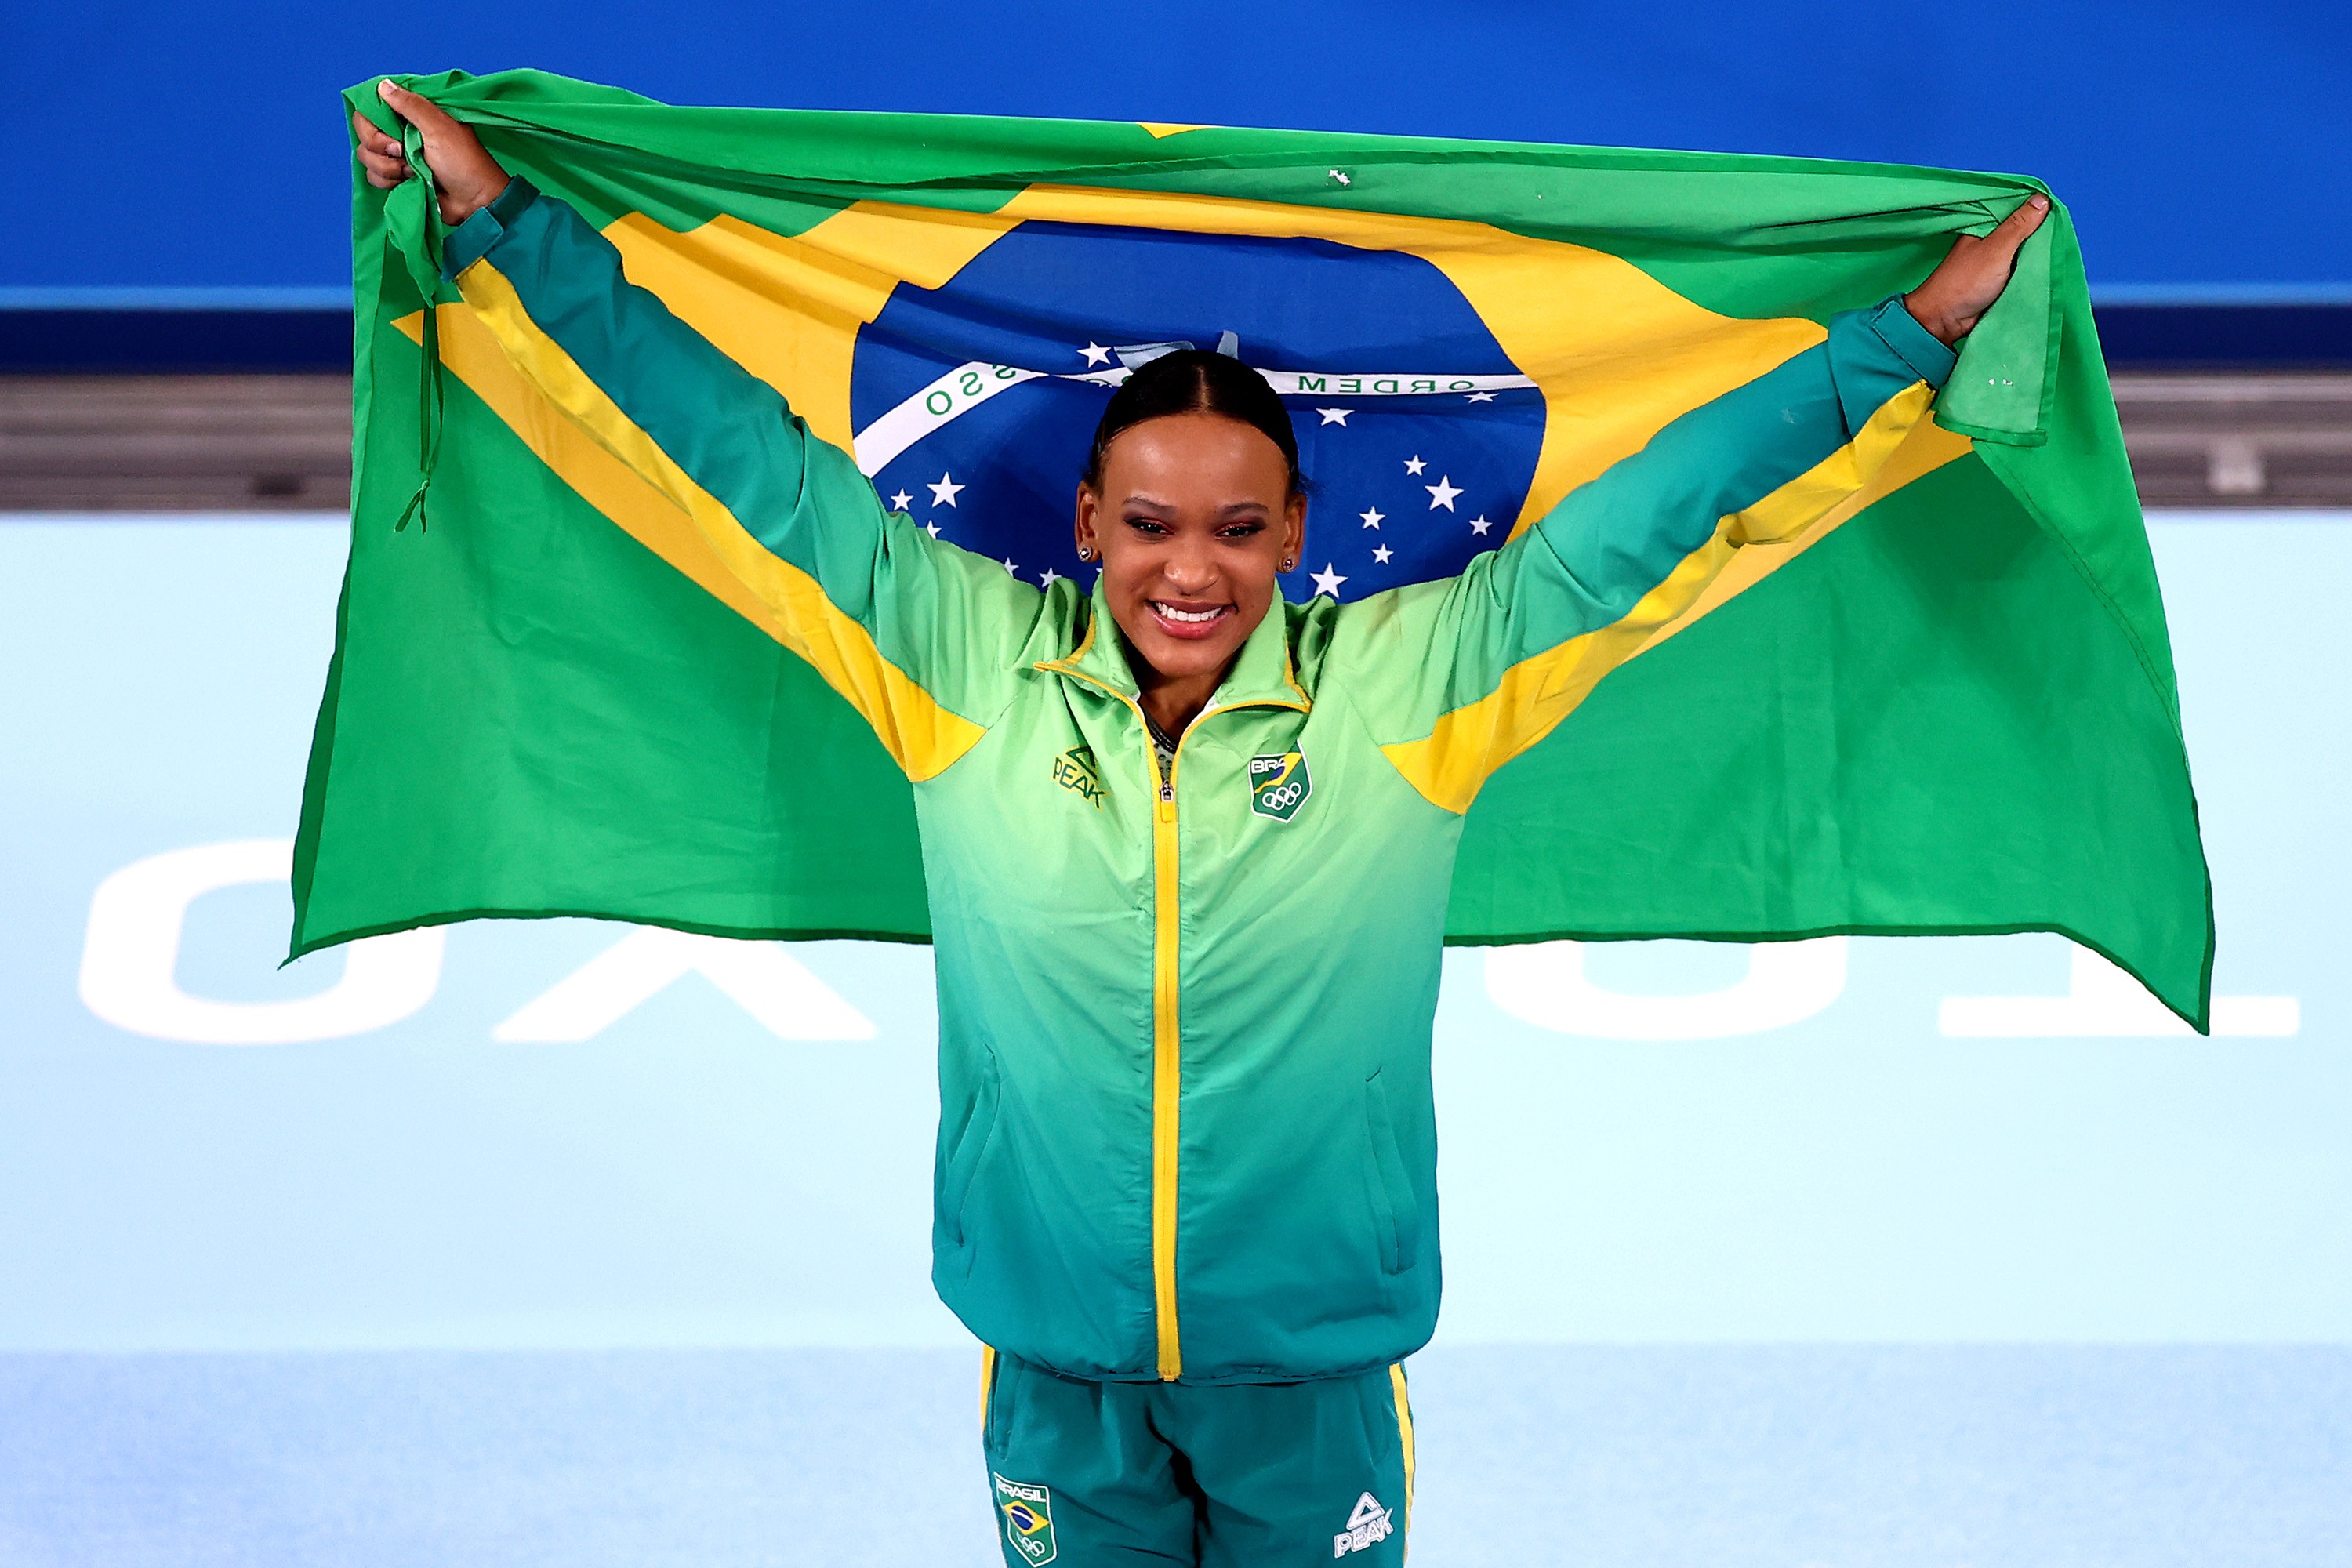 TOKYO, JAPAN - AUGUST 01: Rebeca Andrade of Team Brazil celebrates winning gold in the Women's Vault Final on day nine of the Tokyo 2020 Olympic Games at Ariake Gymnastics Centre on August 01, 2021 in Tokyo, Japan. (Photo by Maja Hitij/Getty Images) (Foto: Getty Images)